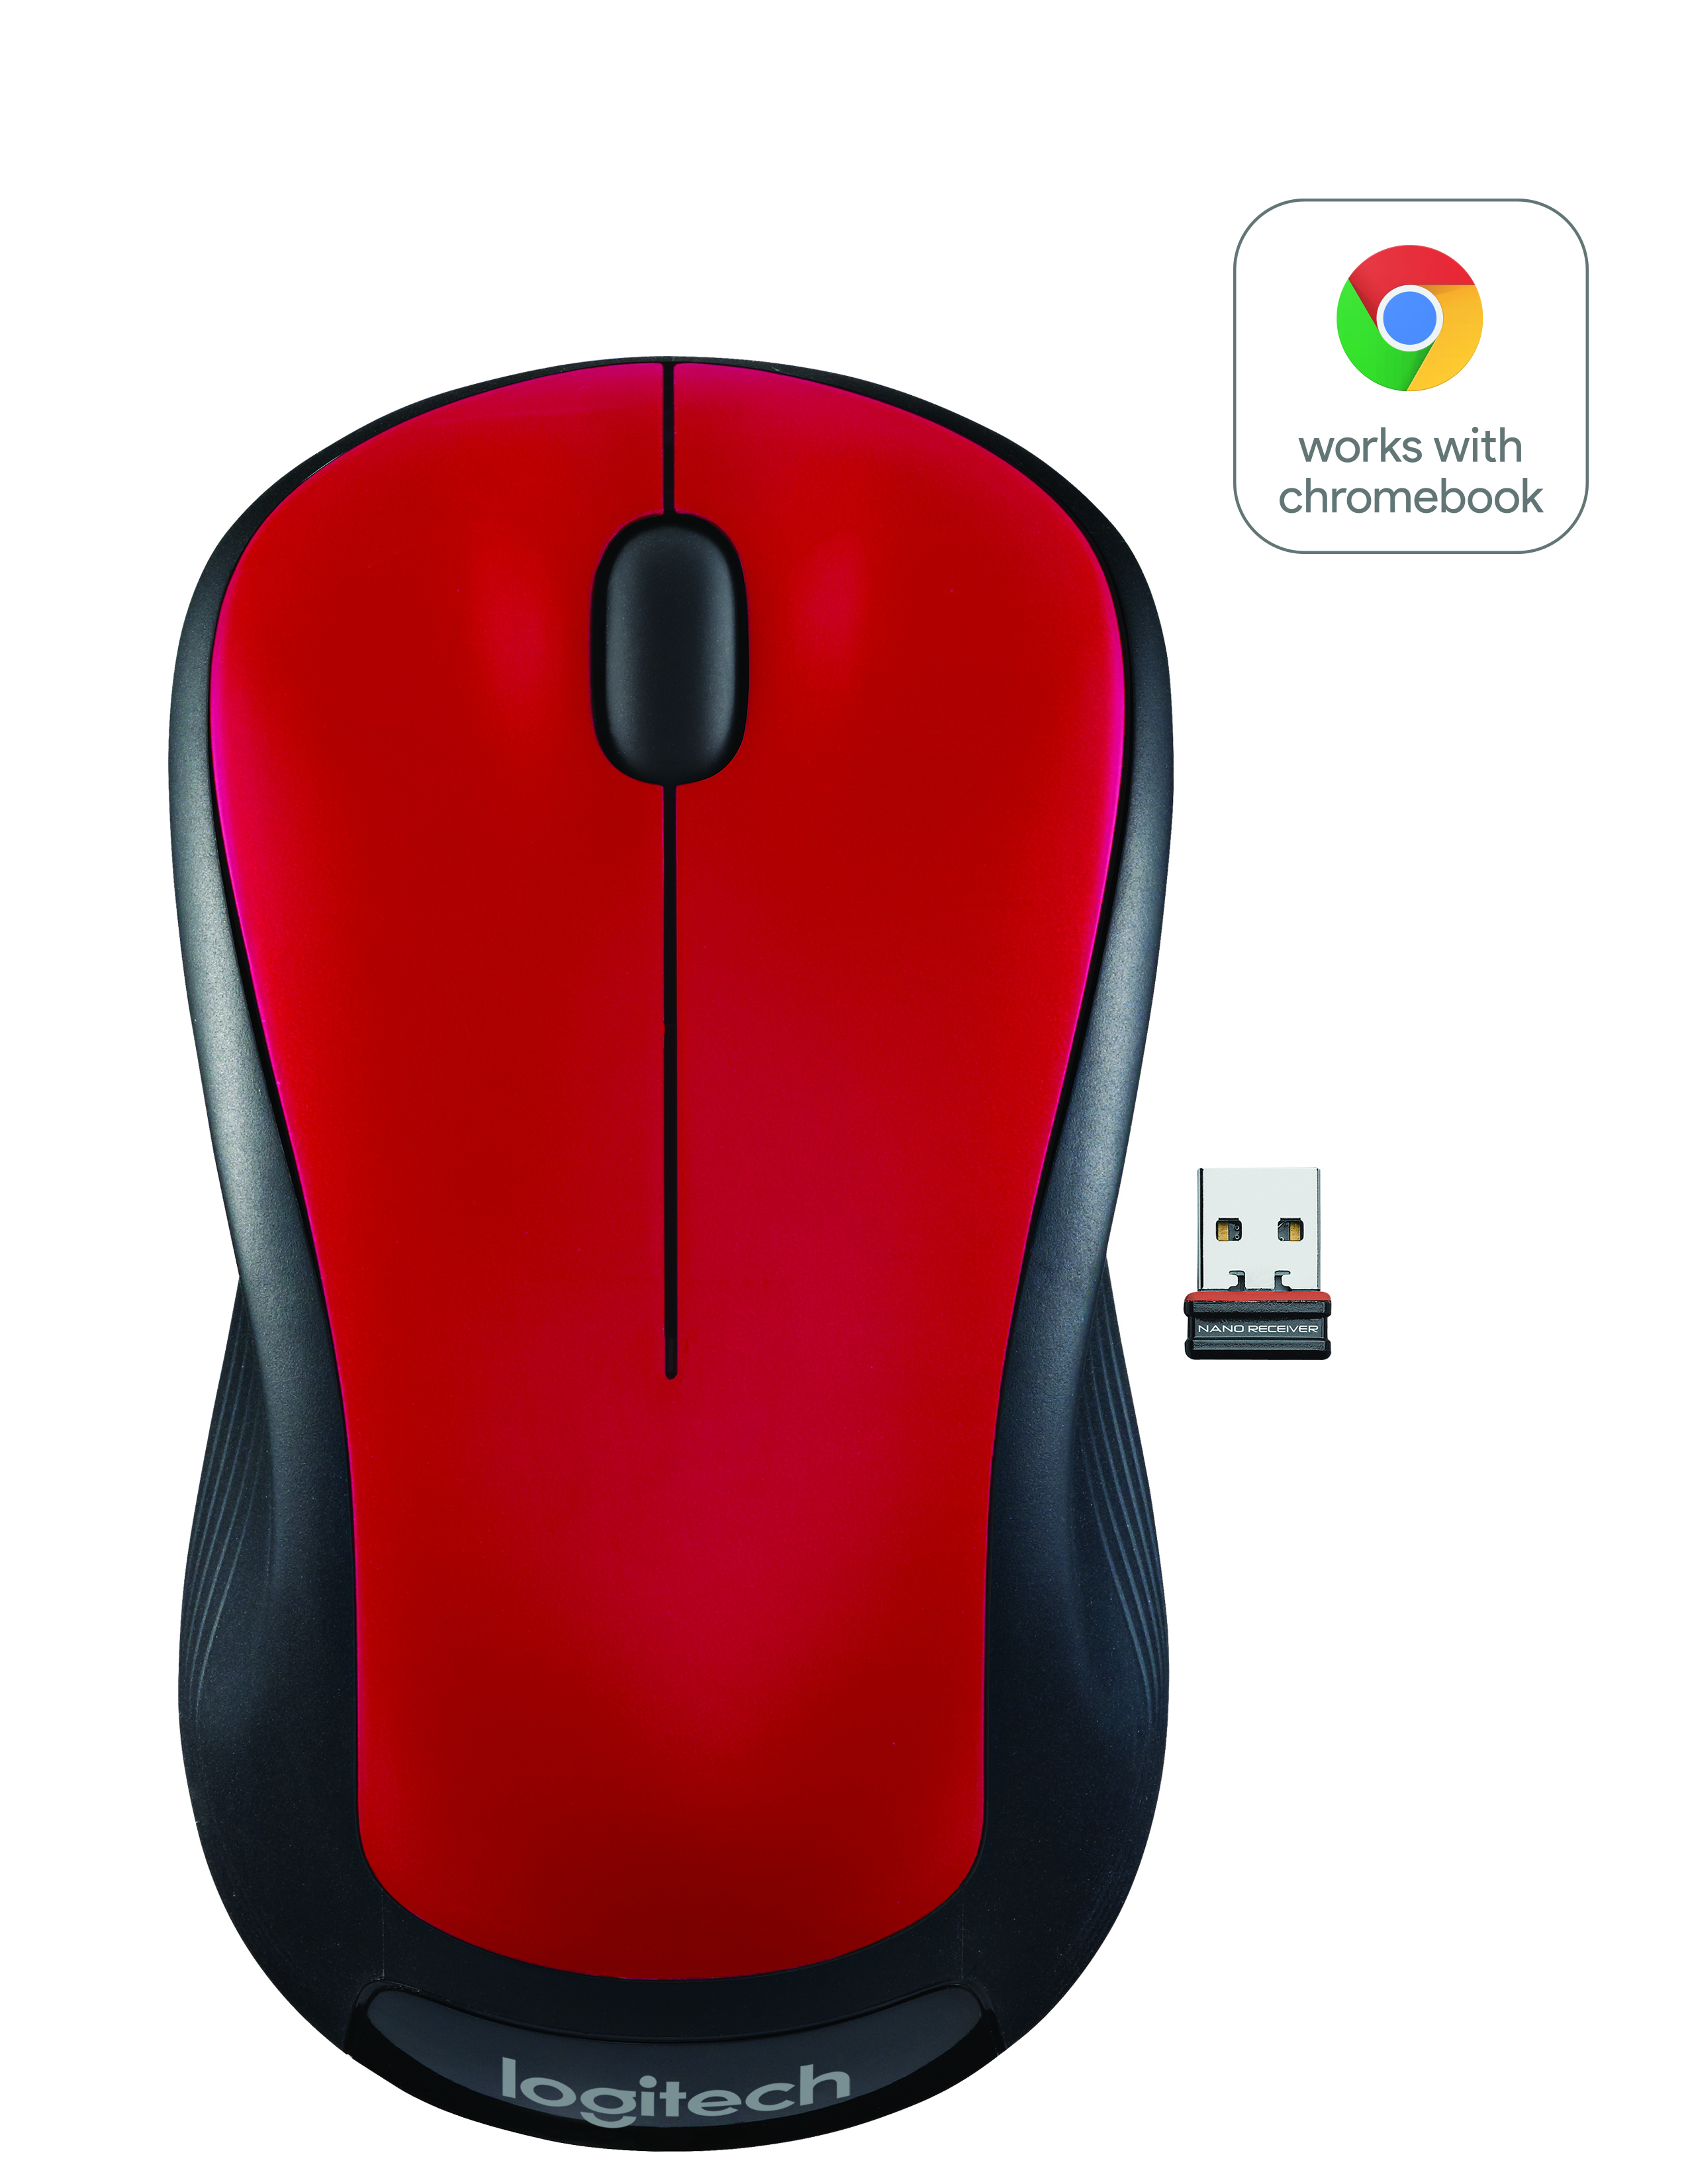 Logitech Full-Size Wireless Mouse, USB Nano Receiver, 1000 DPI Optical Tracking, Ambidextrous, Red - image 5 of 5